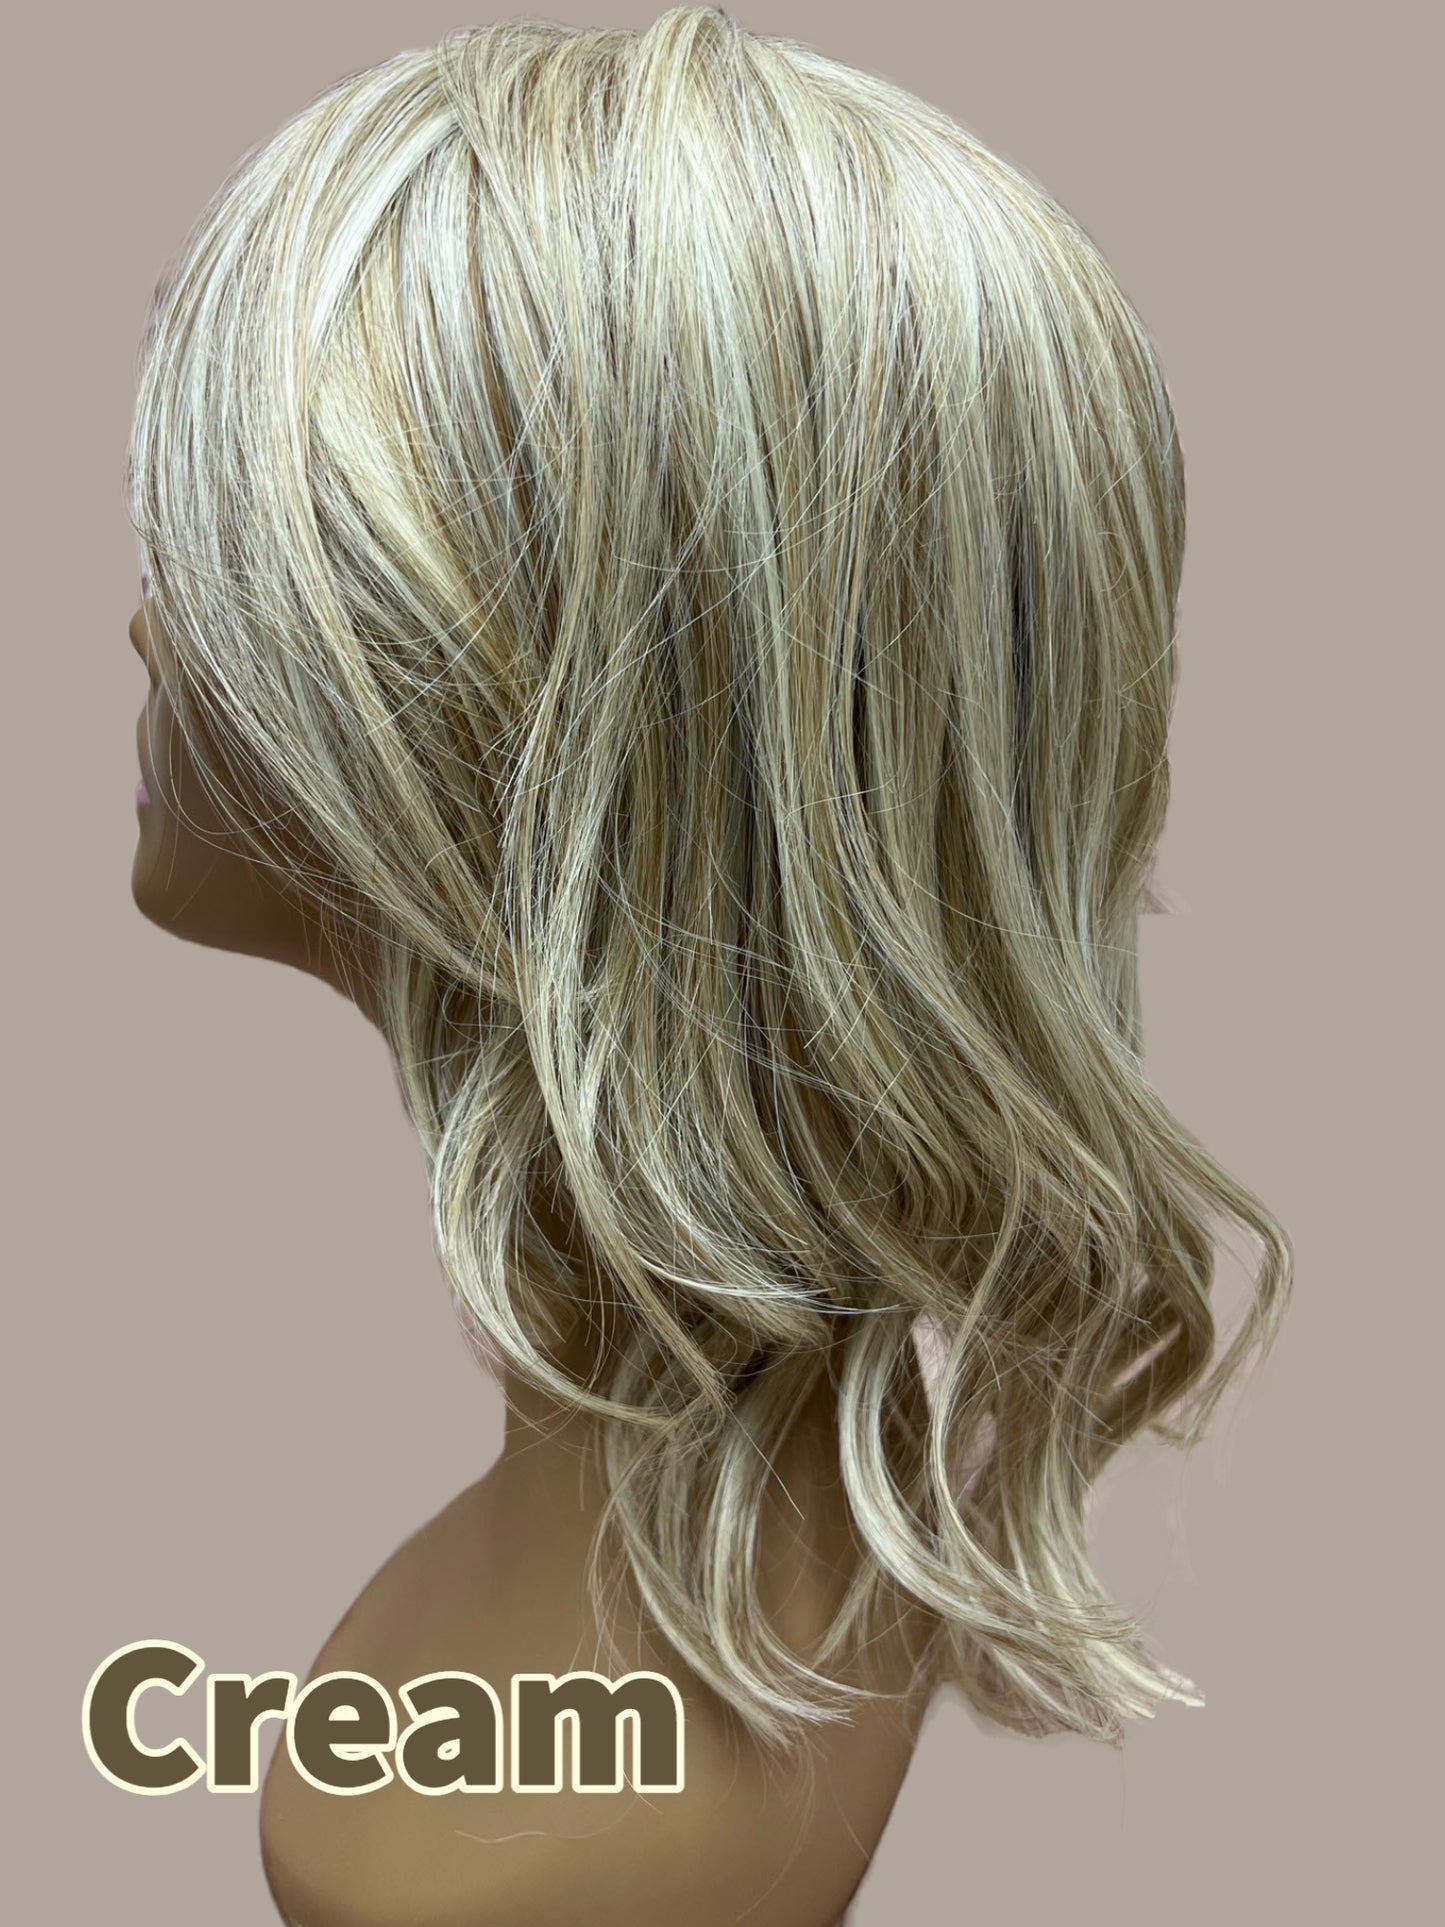 16 inch Topper Beach Wave Bangs LACE FRONT - 40% OFF THIS PRICE NO CODE NEEDED - FINAL SALE